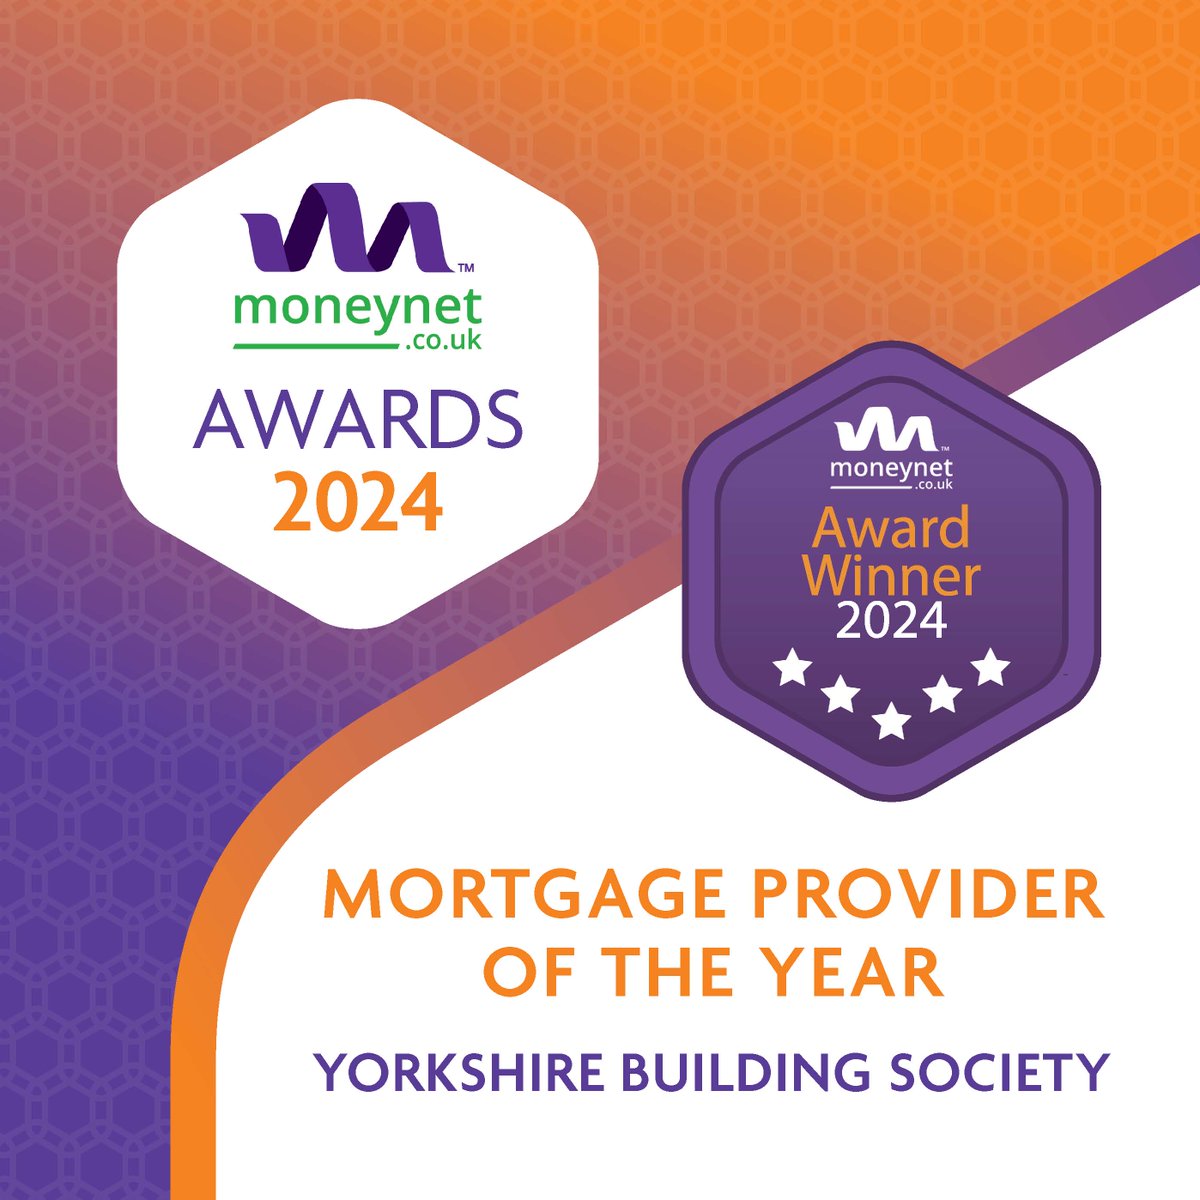 Congratulations to the team @YBS_PressOffice for their success in the 2024 Moneynet Awards #MoneynetAwards24